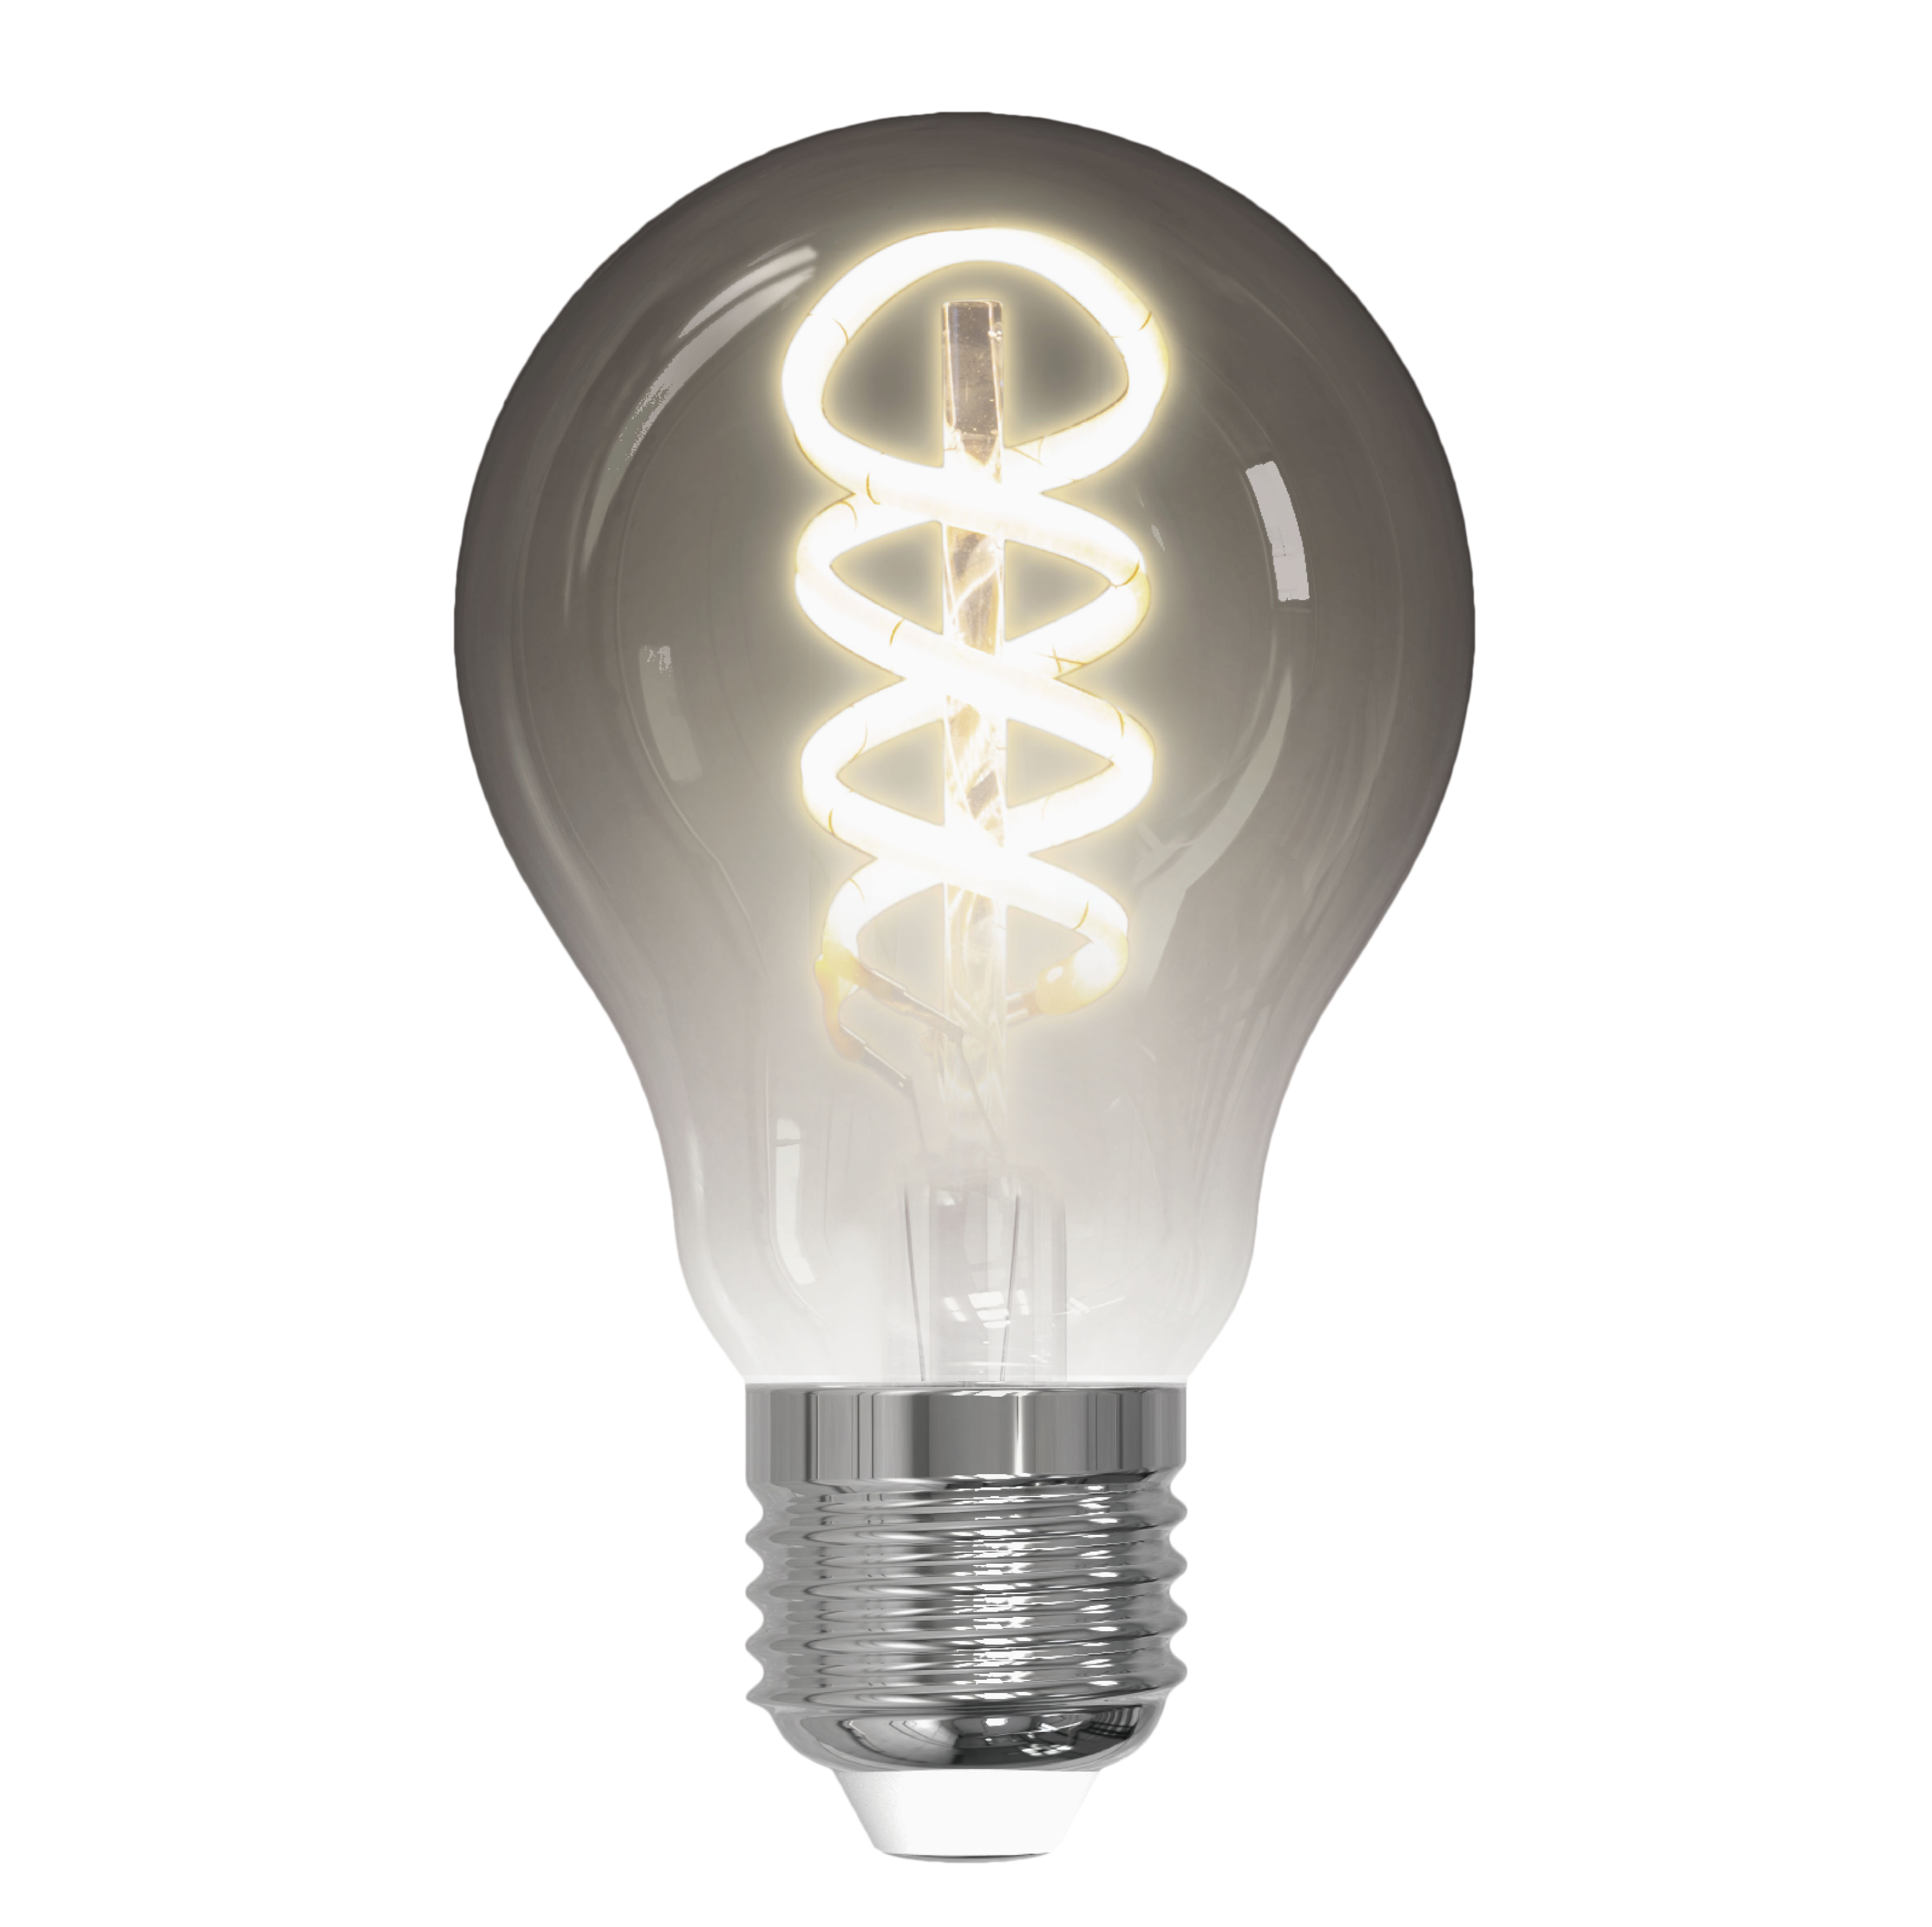 DELTACO Smart Bulb E27 Spiral Filament LED Bulb 5.5W 300lm A60 WiFi – Dimmable White LED Light